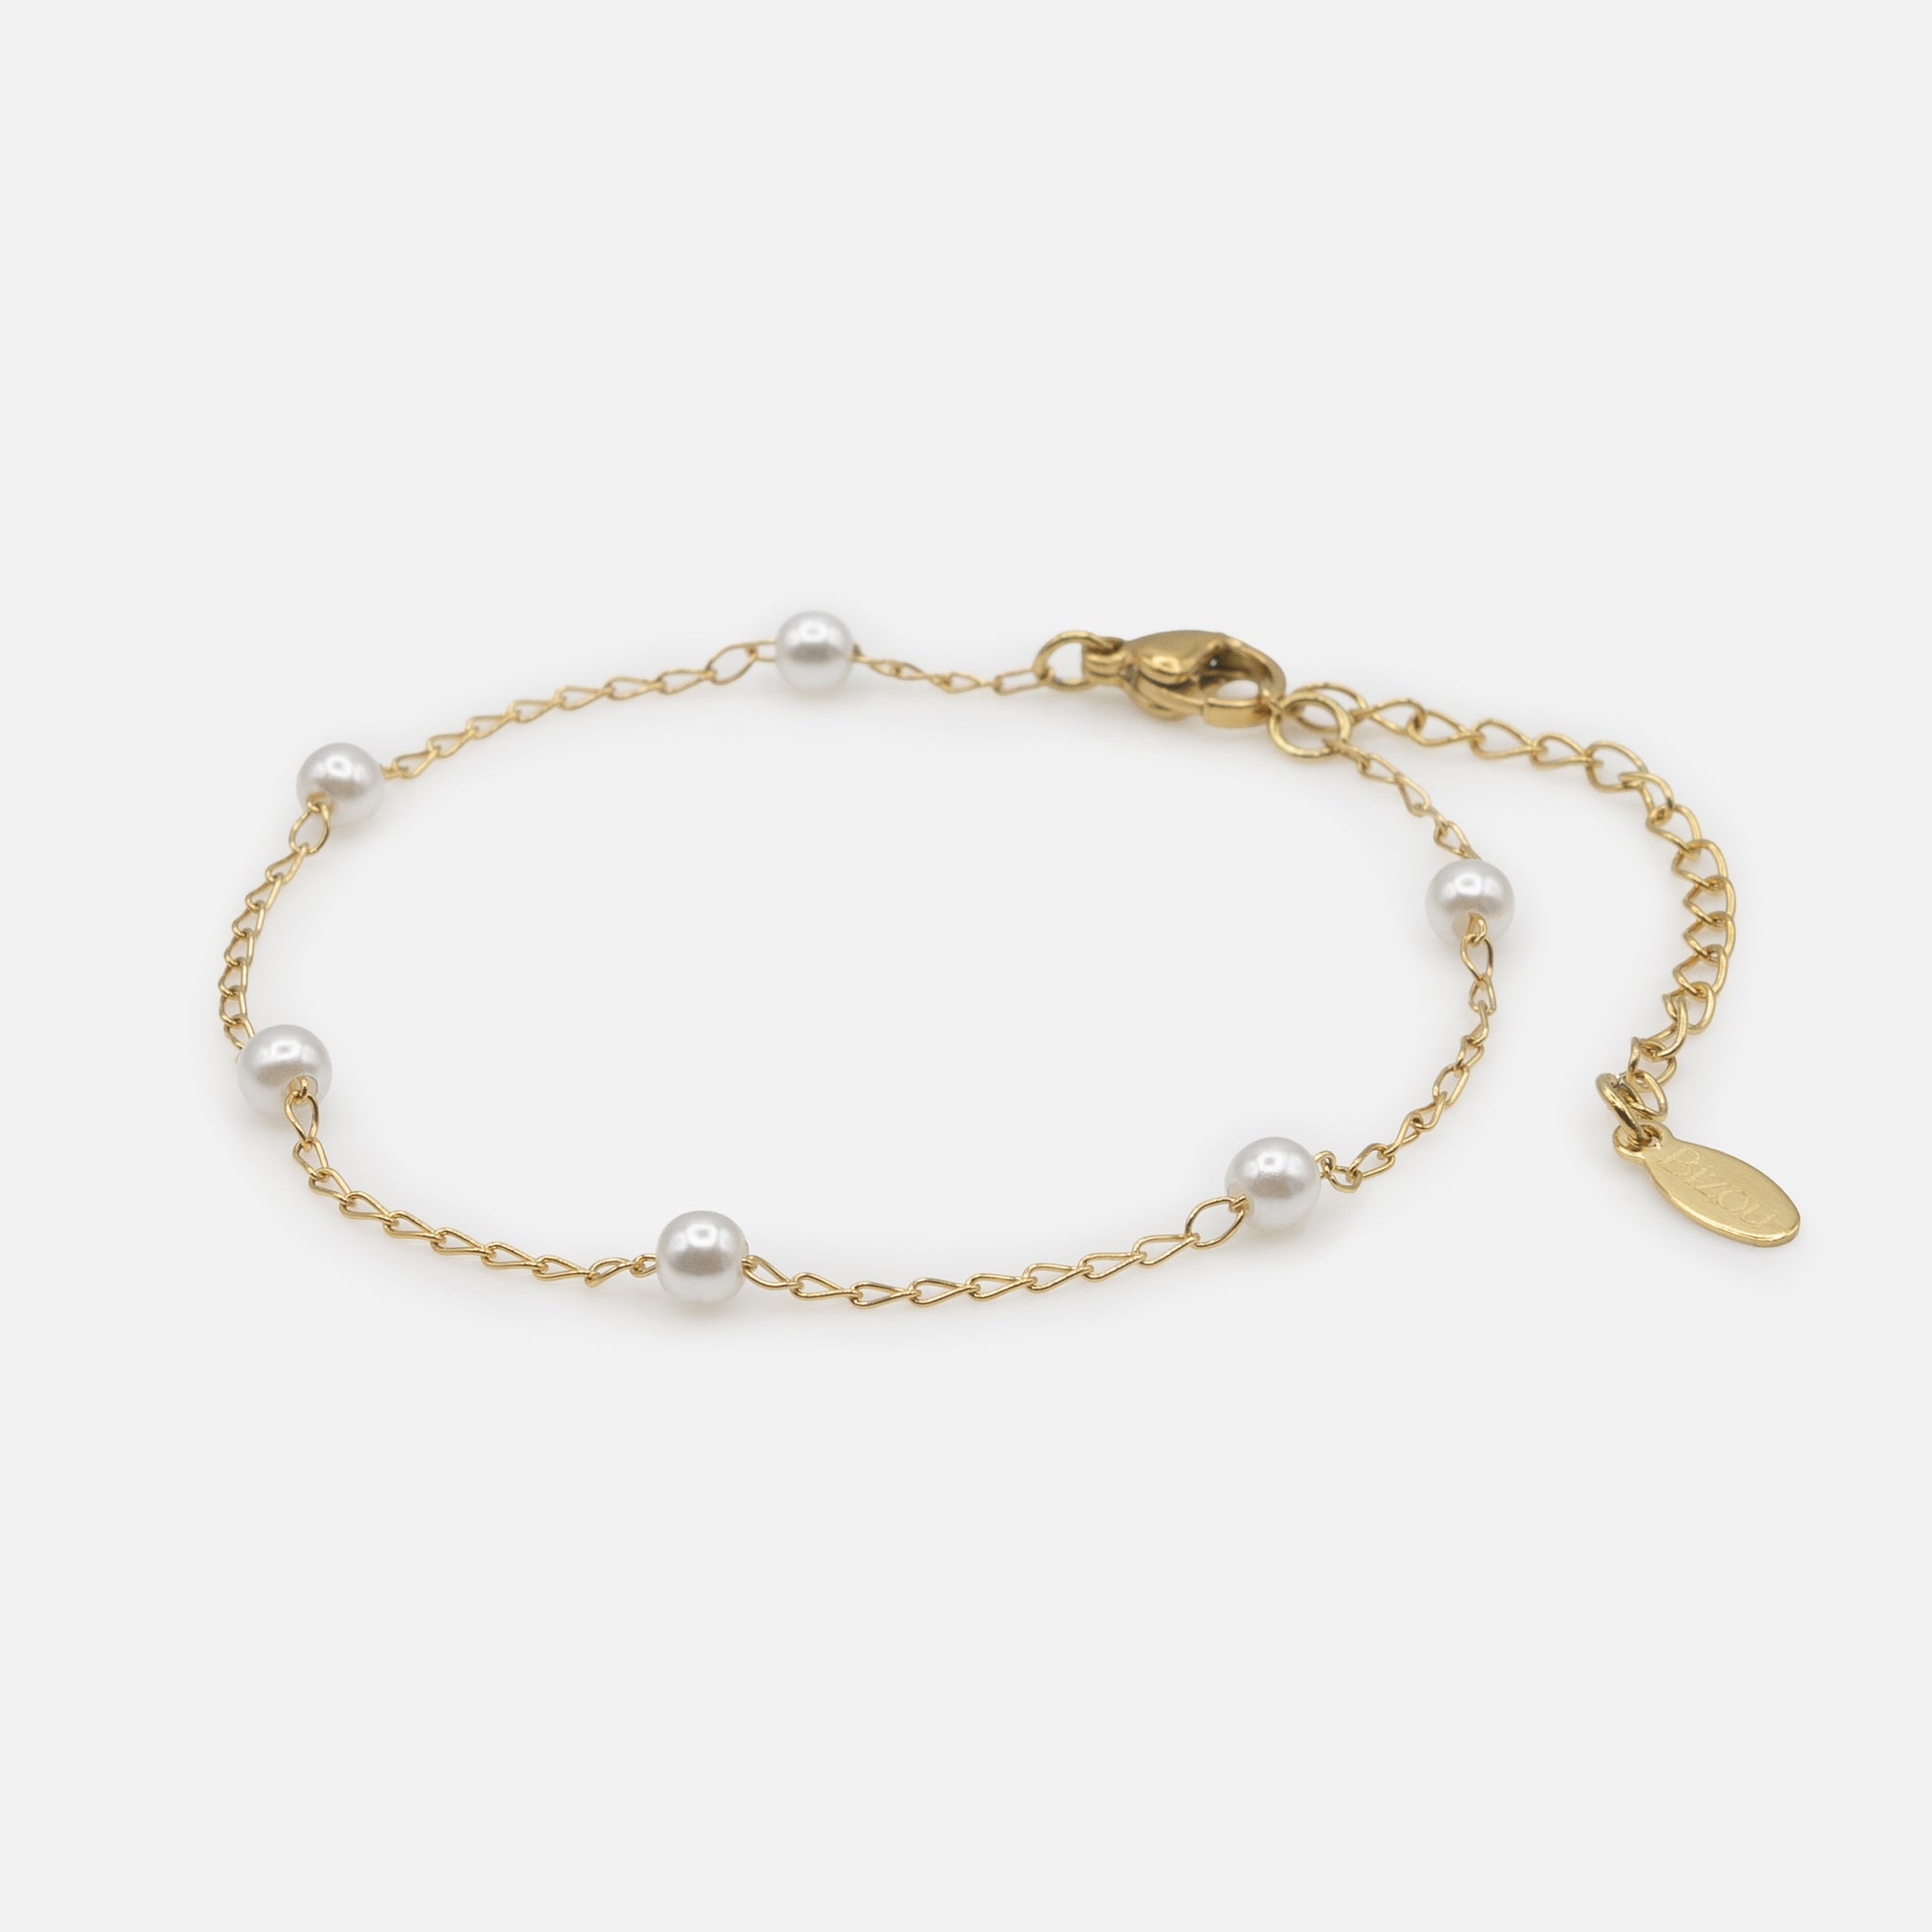 Golden bracelet with small stainless steel beads